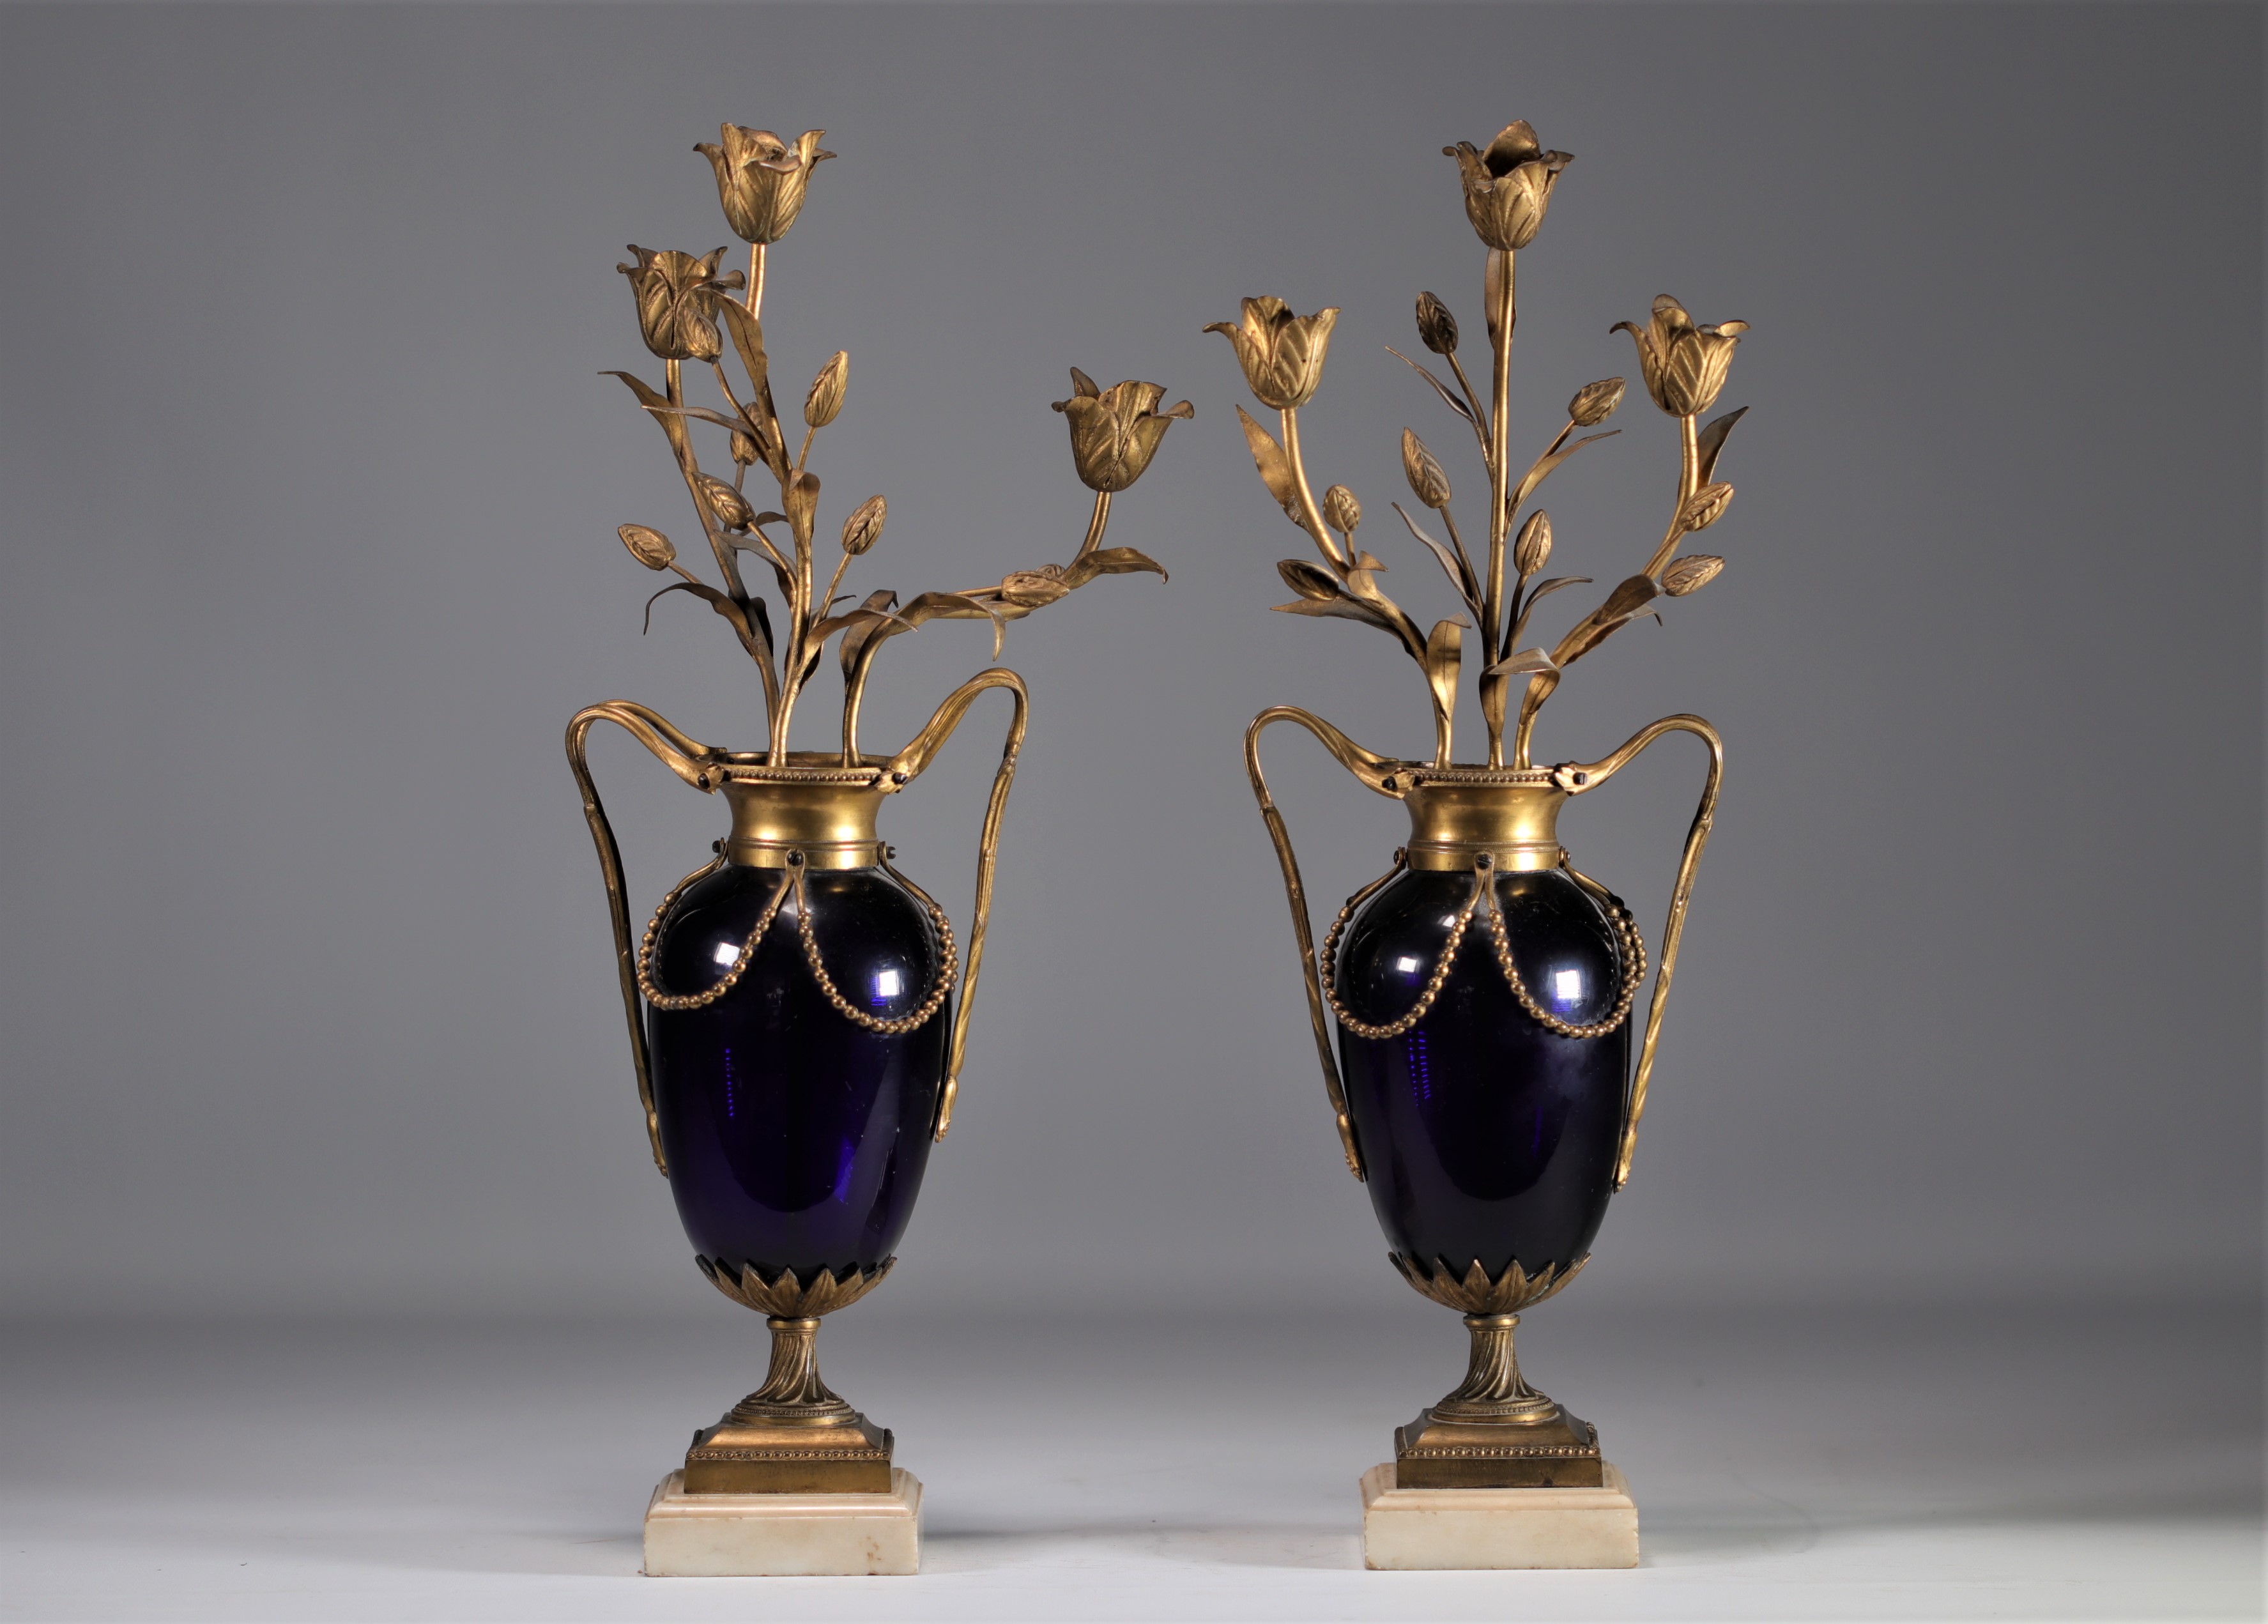 Pair of "candelabra" vases in Le Creusot blue glass and bronze, Louis XVI period - Image 2 of 5